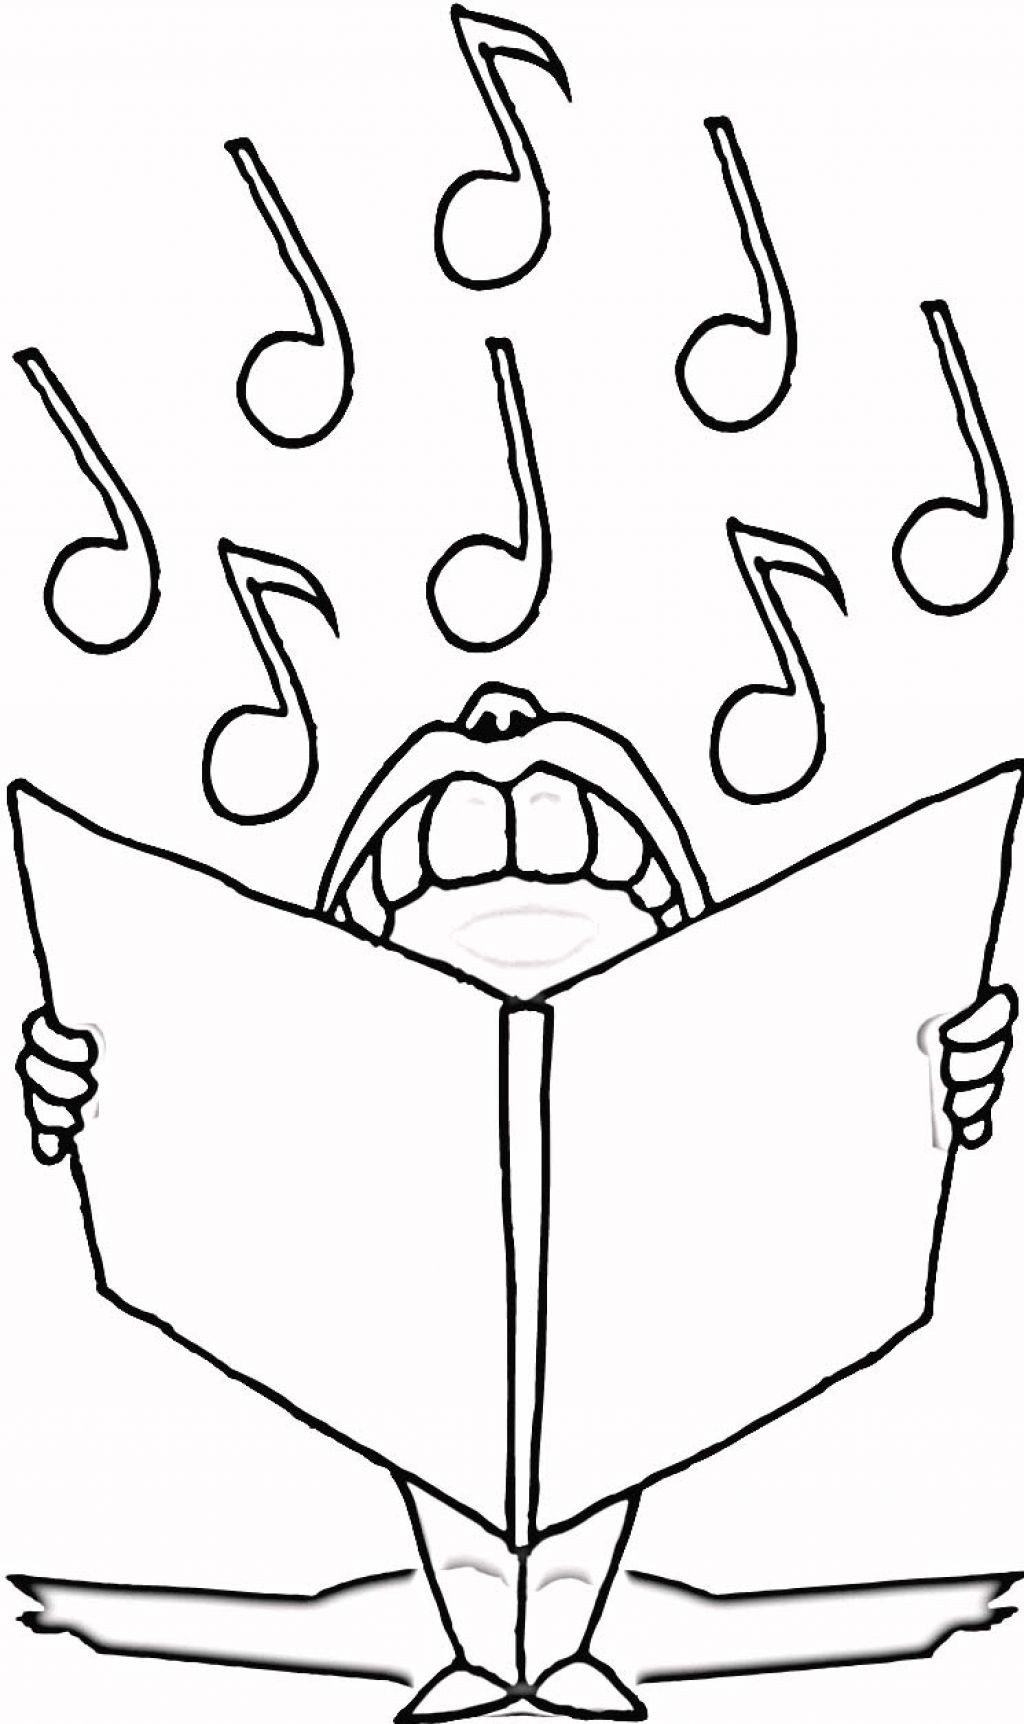 Music Coloring Pages For Kids
 Free Printable Music Note Coloring Pages For Kids